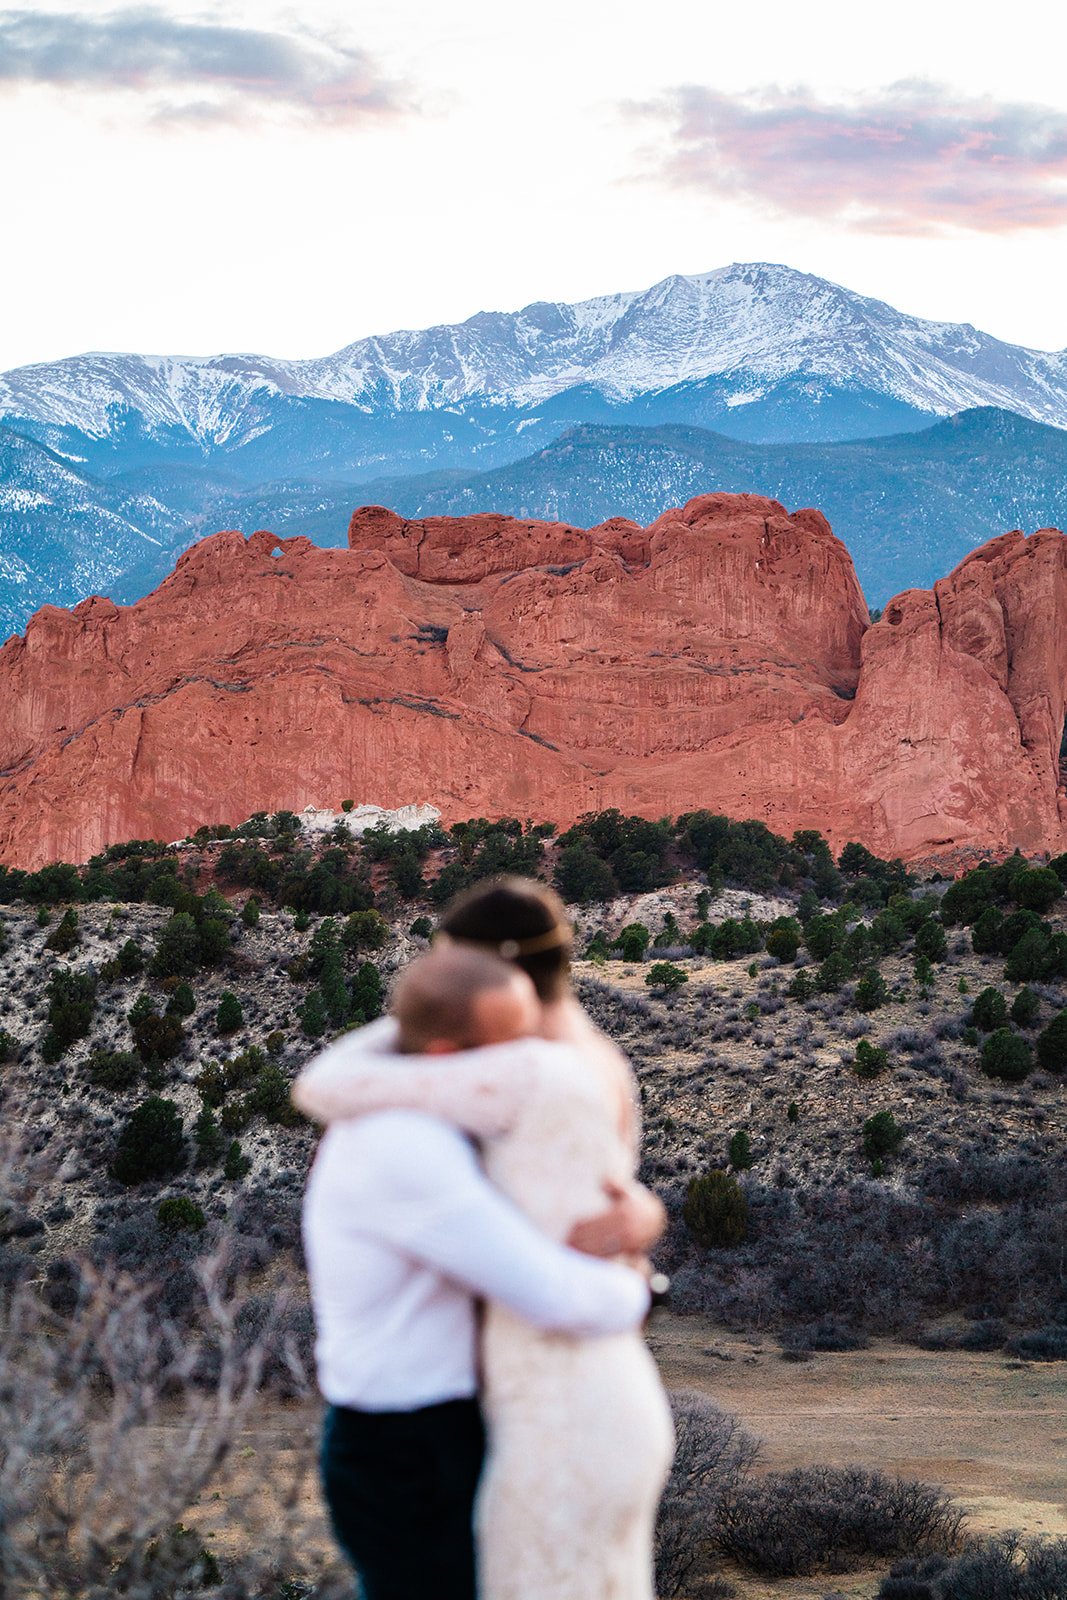 Newlyweds embrace in front of a red rock formation called the kissing camels at the Mesa overlook during their Garden of the Gods elopement with snowy mountains in the background.